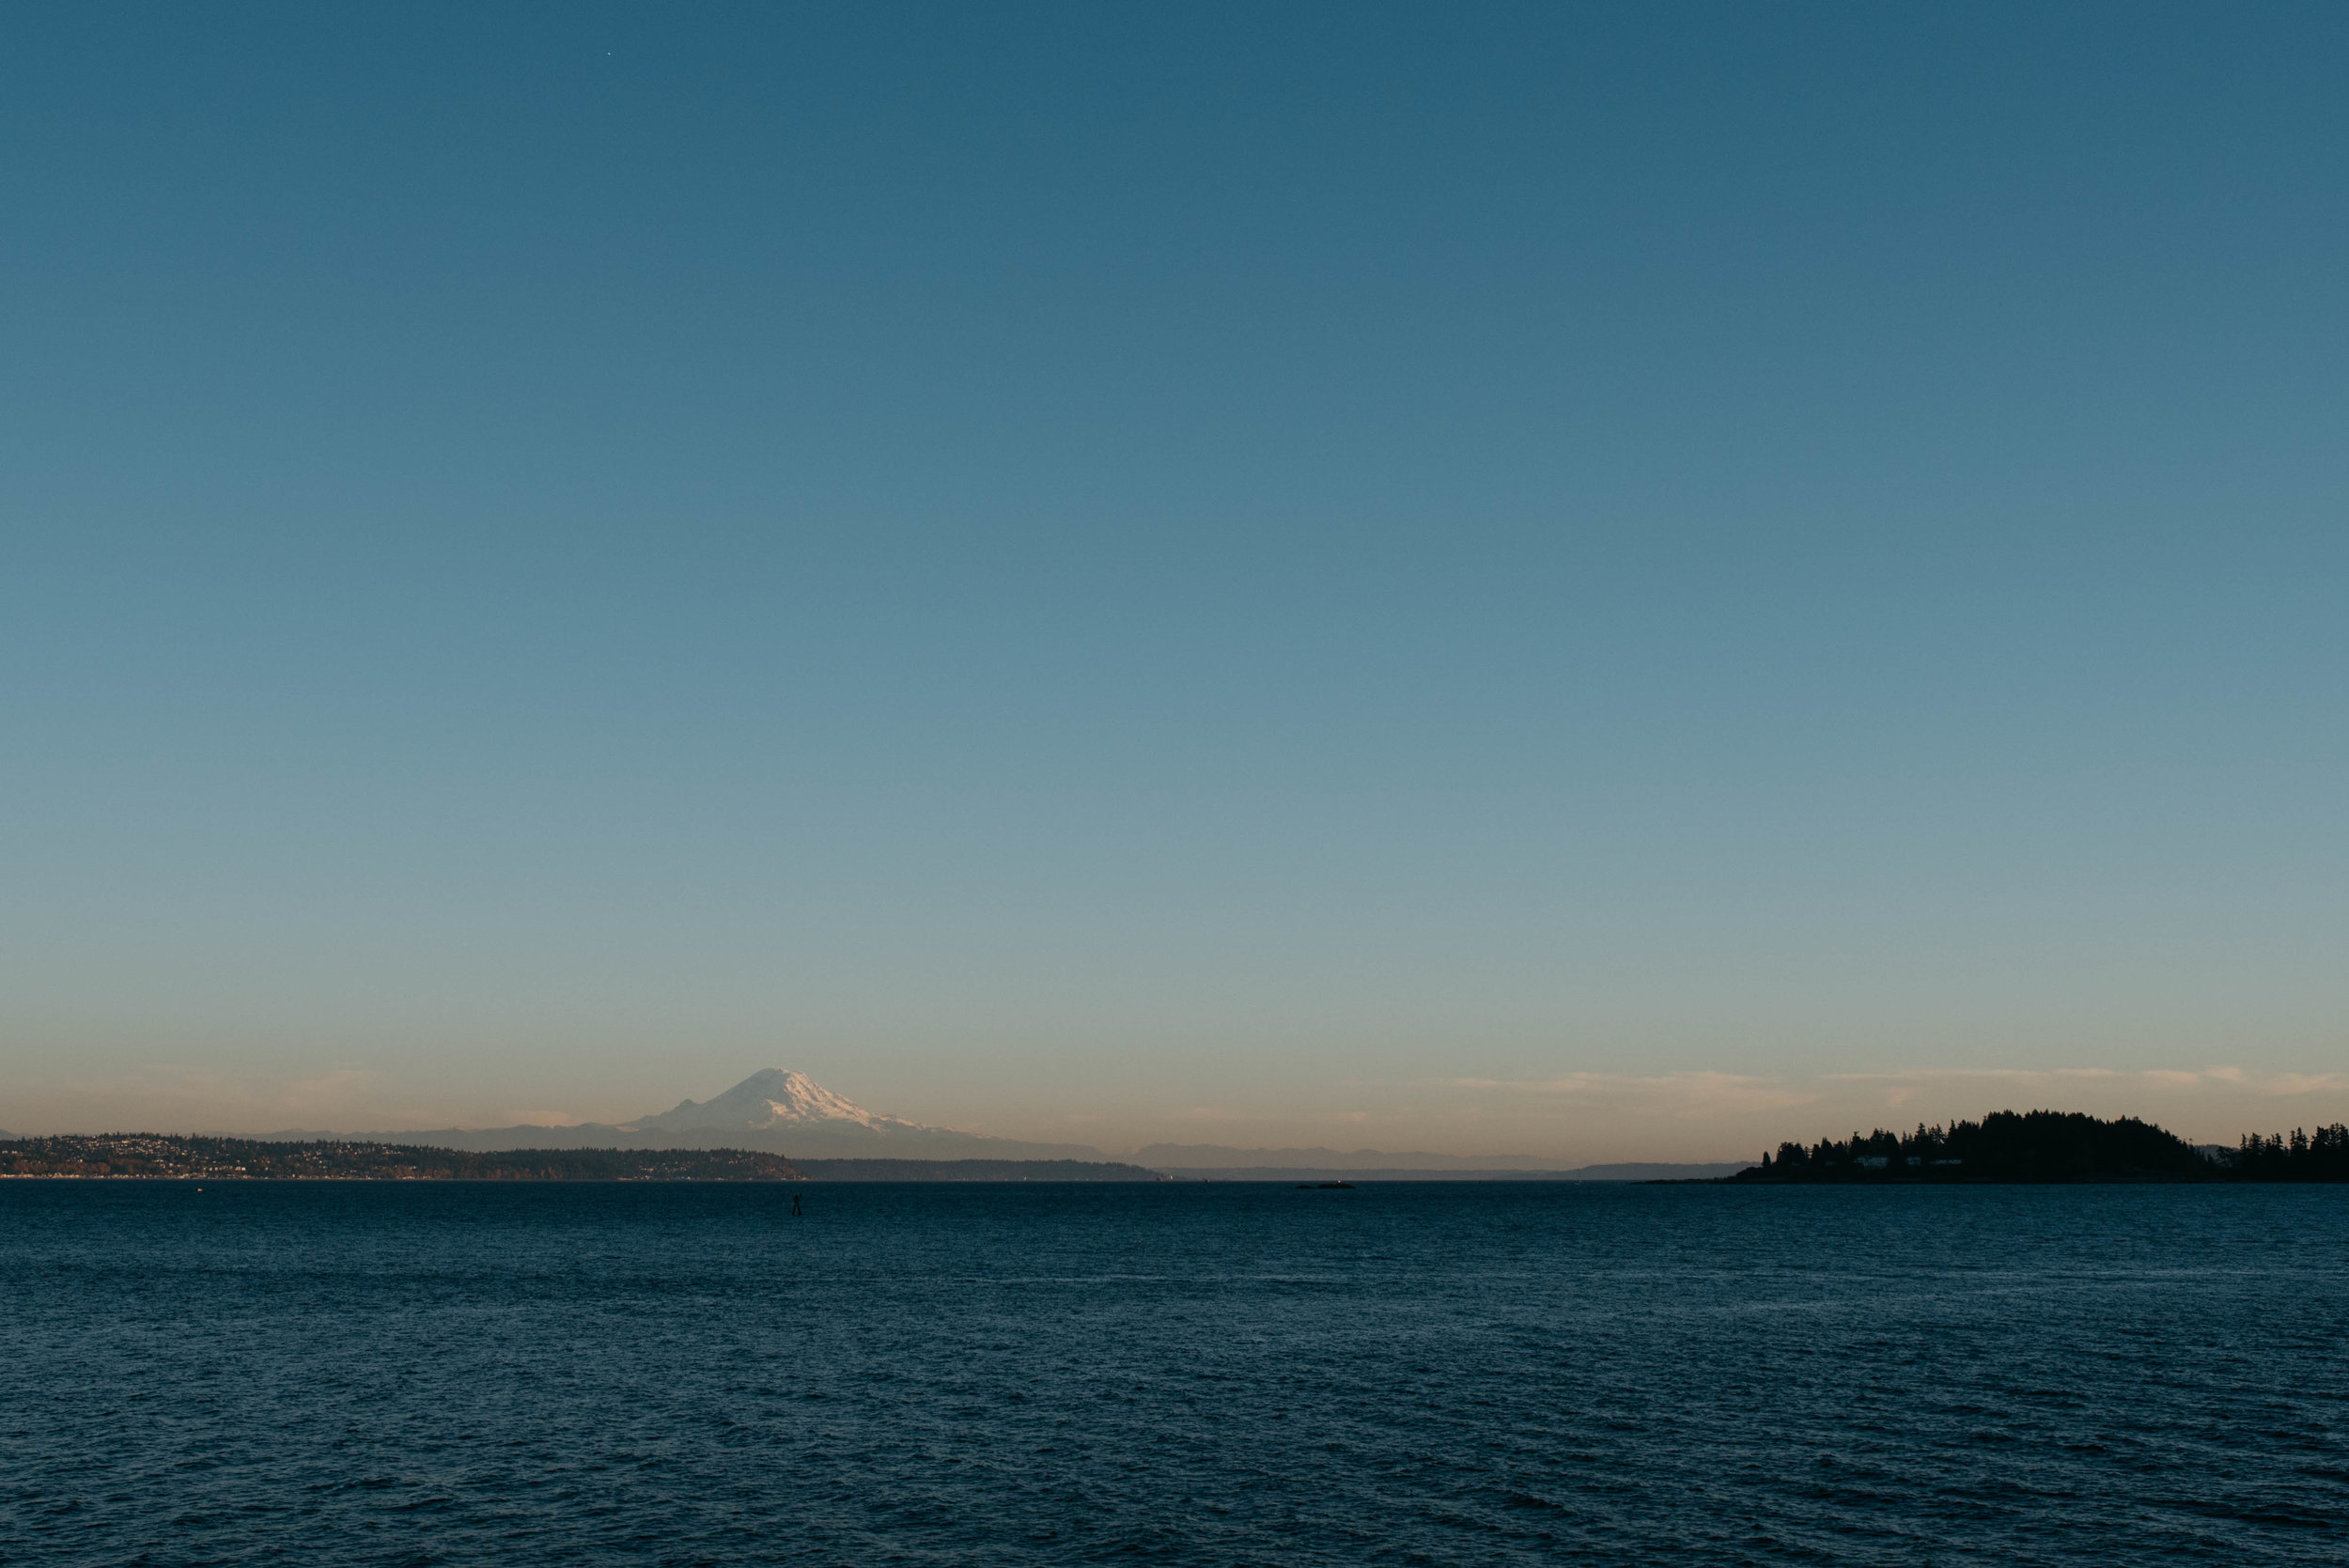 Seattle Ferry Travel photography mariah fisher-1.jpg